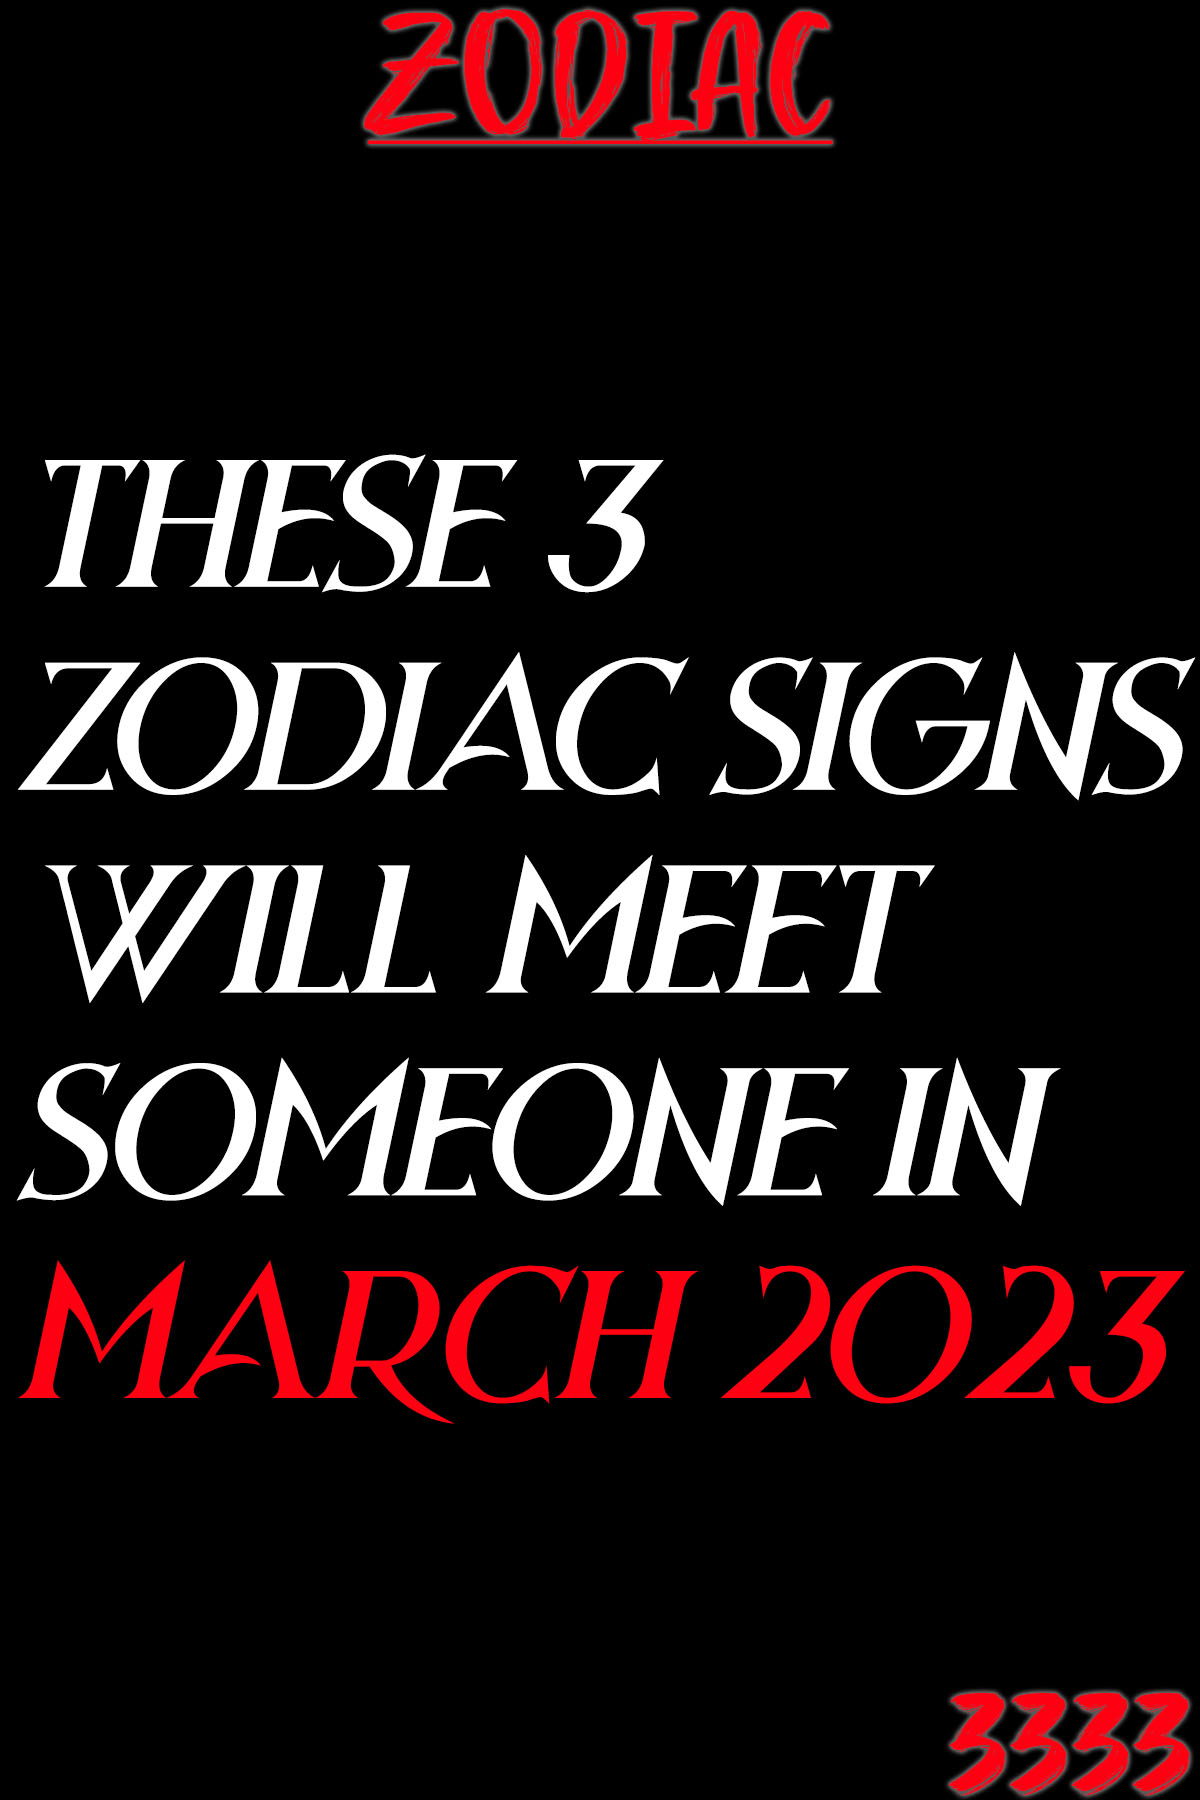 These 3 Zodiac Signs Will Meet Someone In March 2023